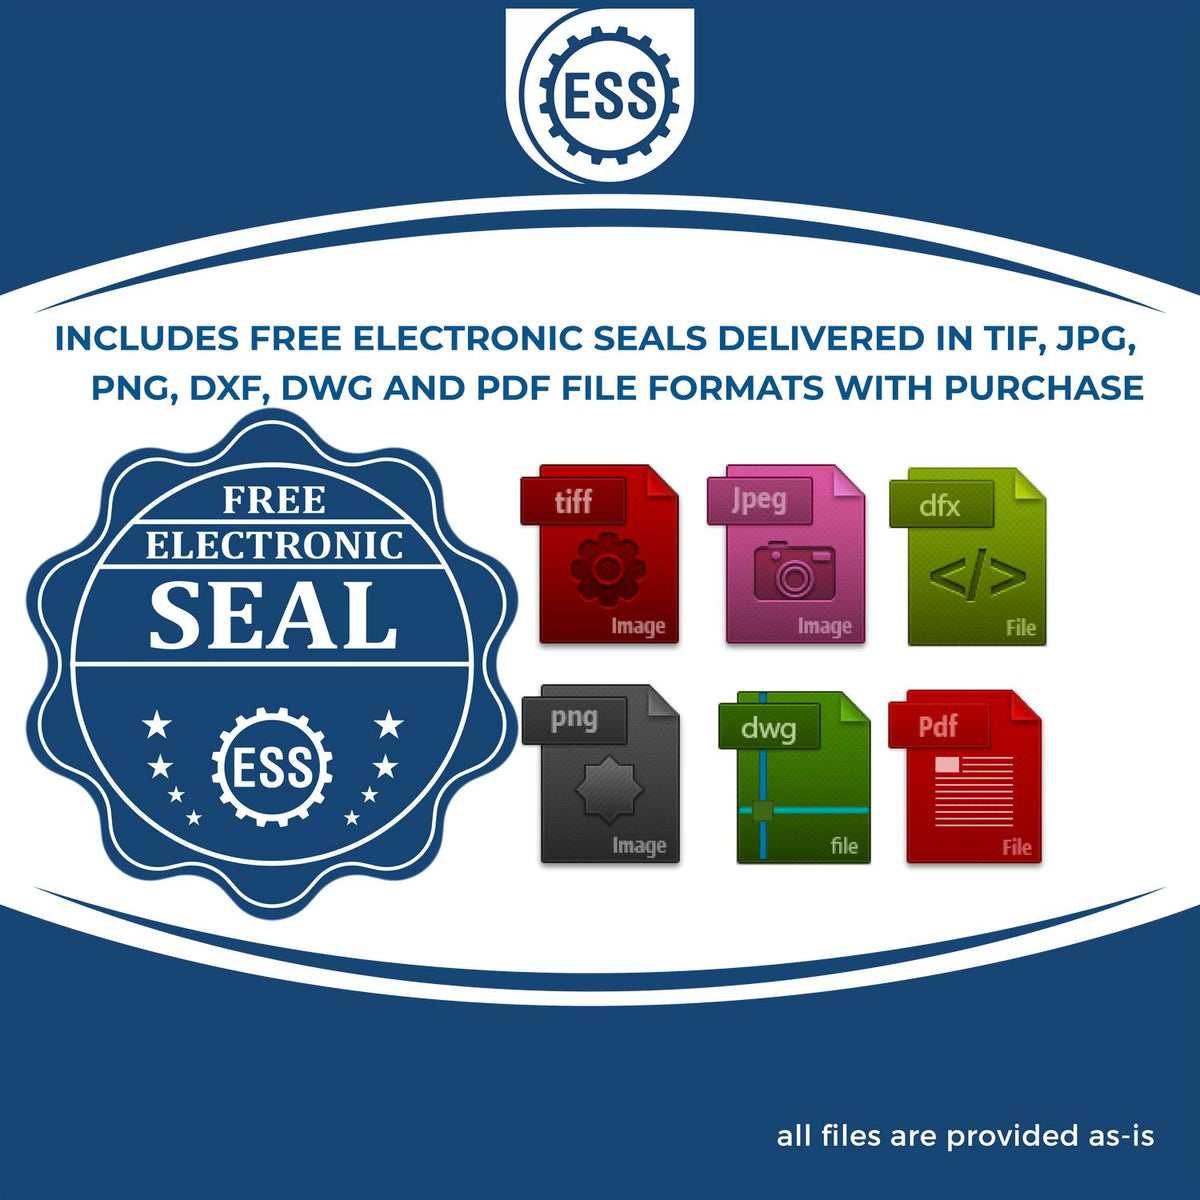 An infographic for the free electronic seal for the Self-Inking Rectangular Georgia Notary Stamp illustrating the different file type icons such as DXF, DWG, TIF, JPG and PNG.